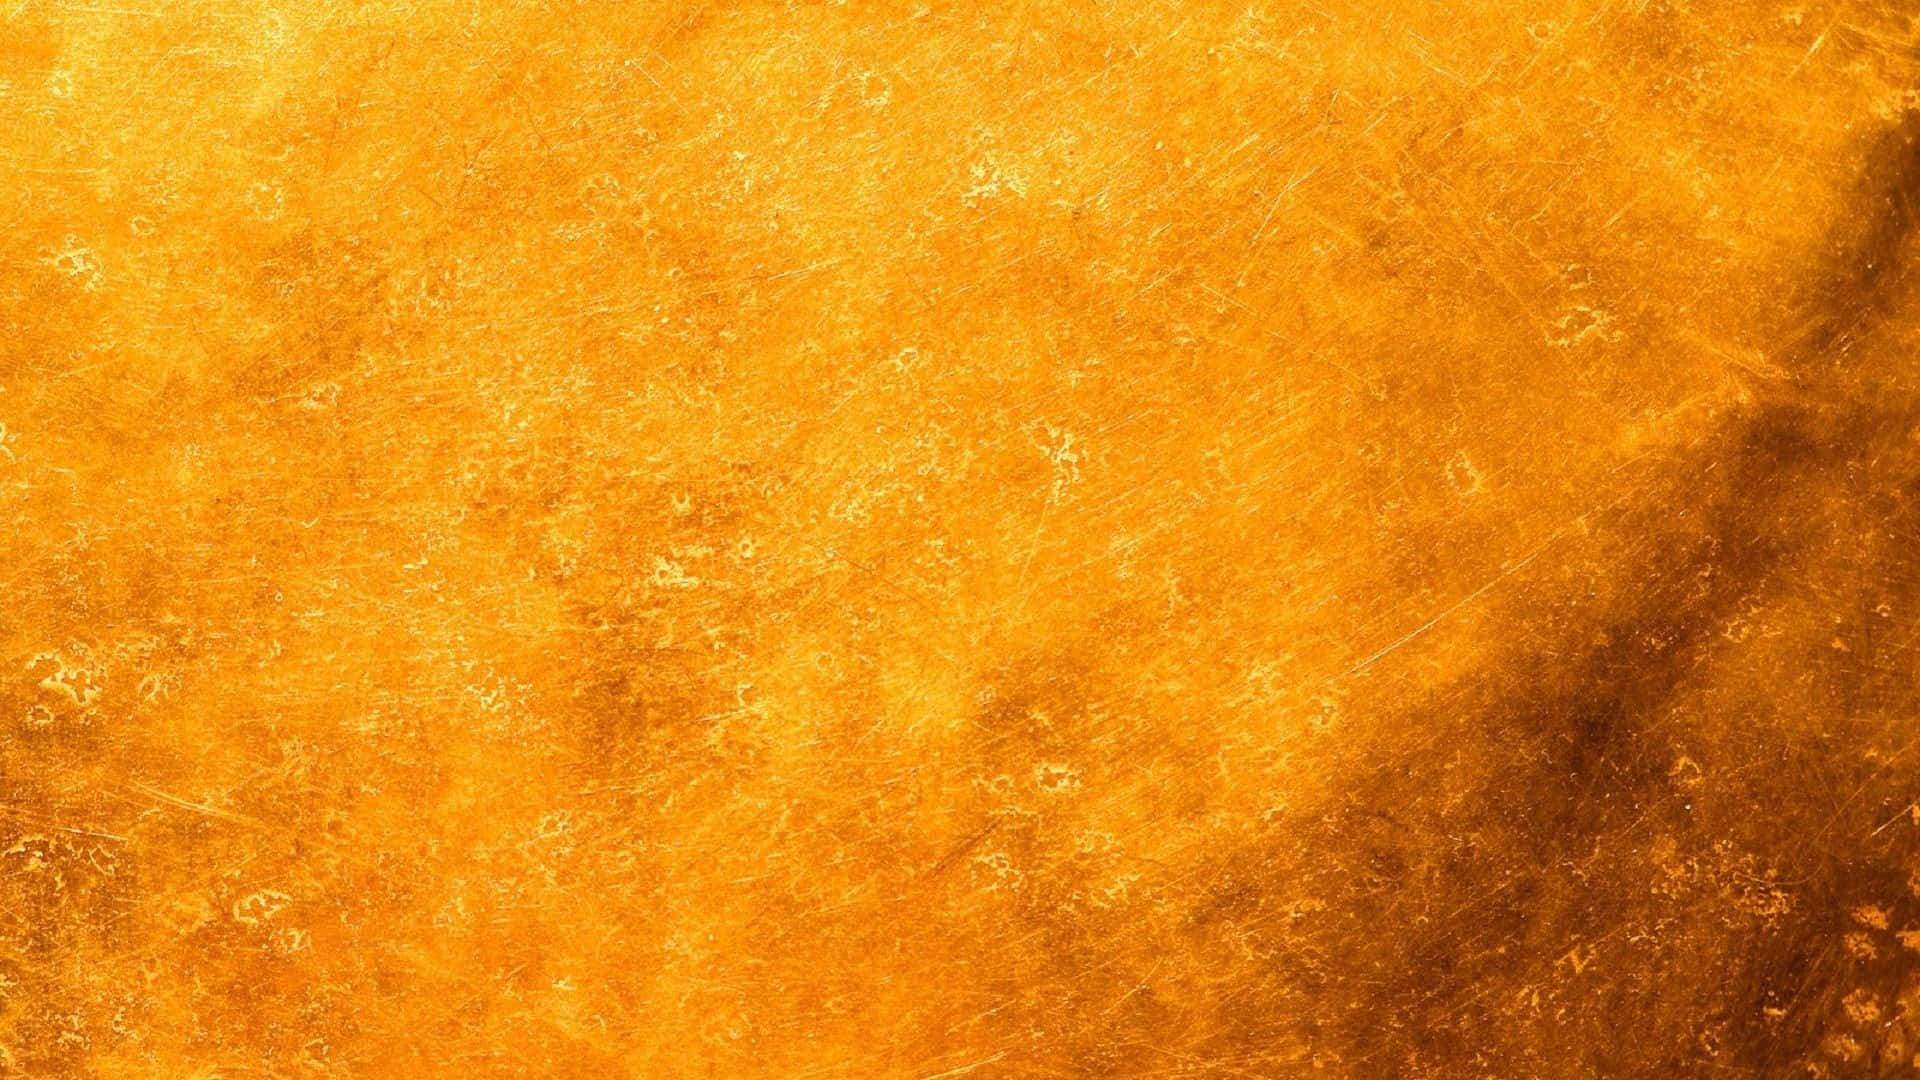 "A Grungy, Moody Yellow" Wallpaper